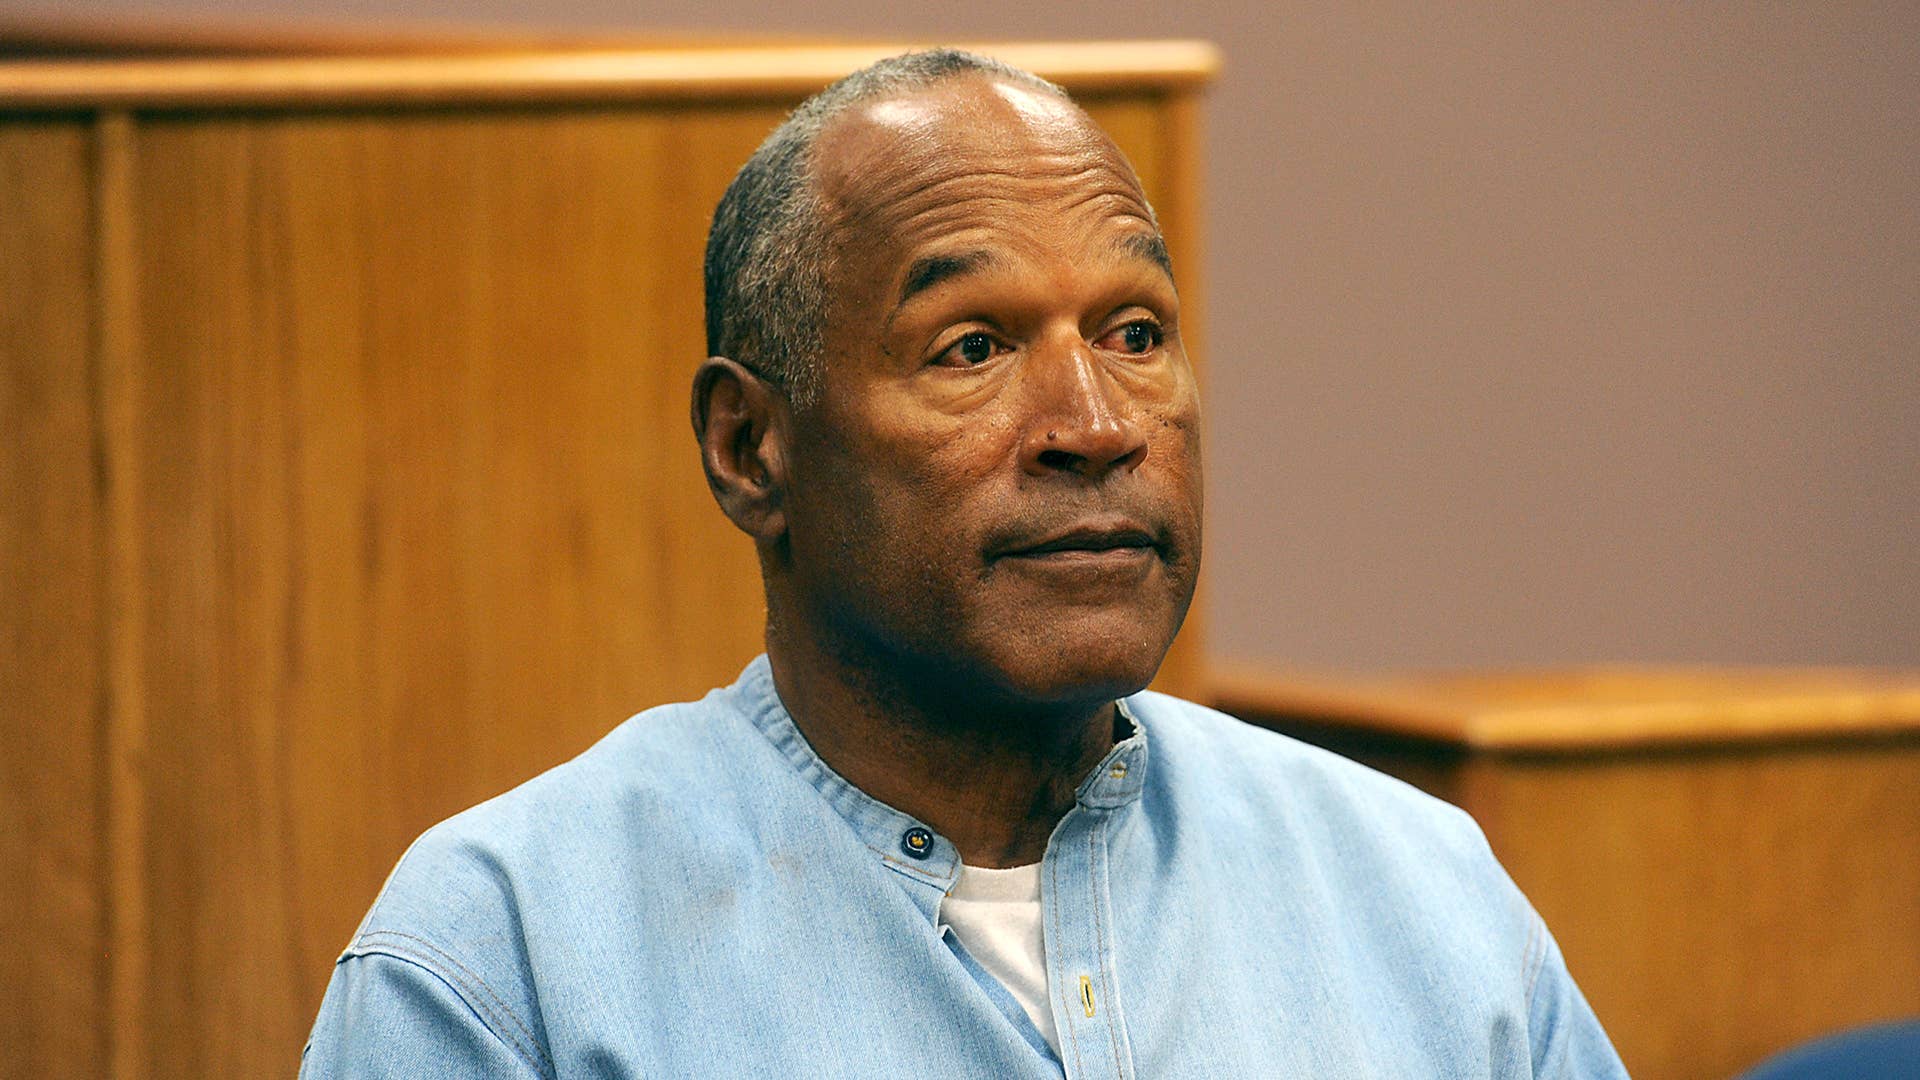 O.J. Simpson attends his parole hearing at Lovelock Correctional Center in 2017